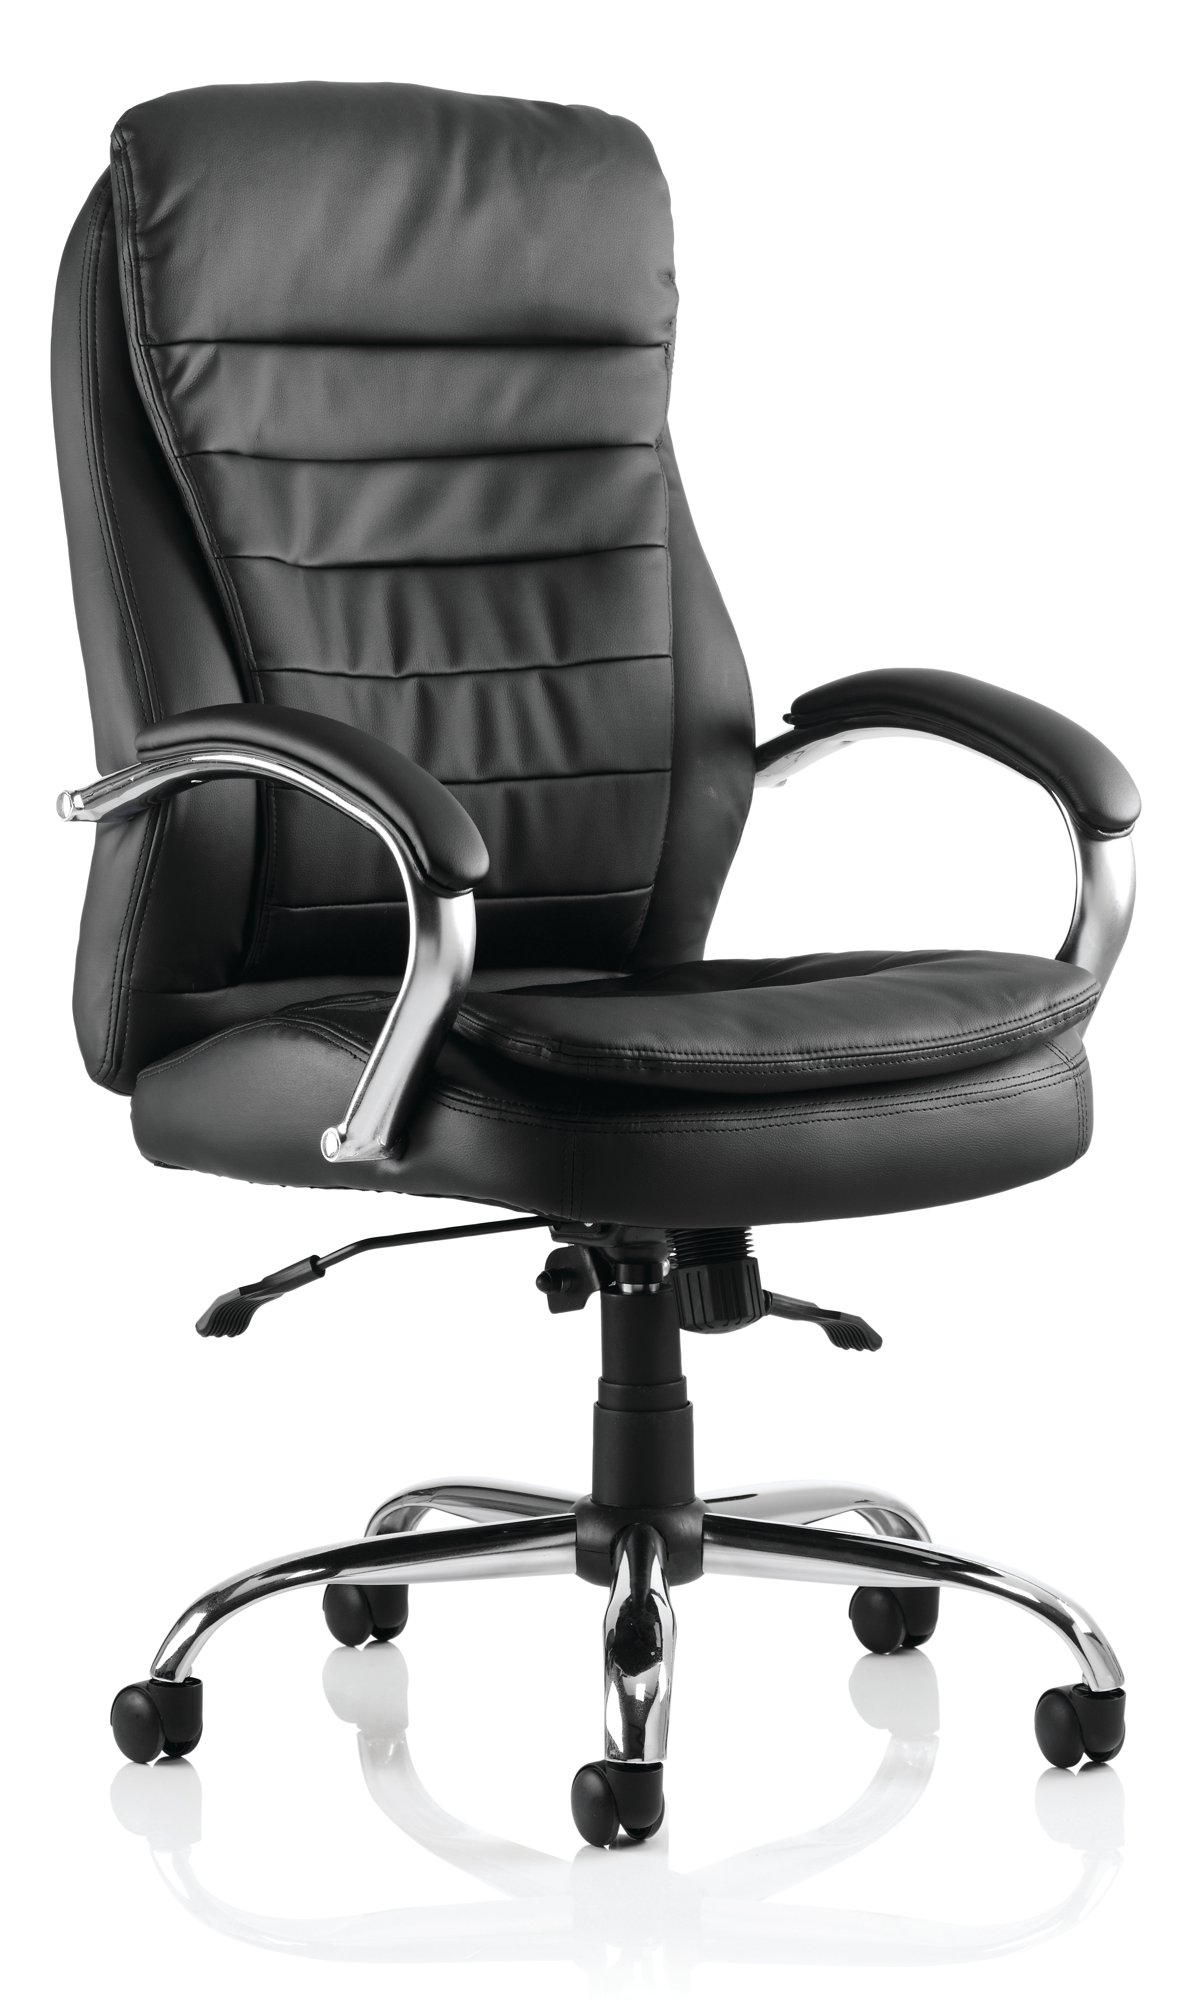 Rocky Executive Chair Black Leather High Back EX000061